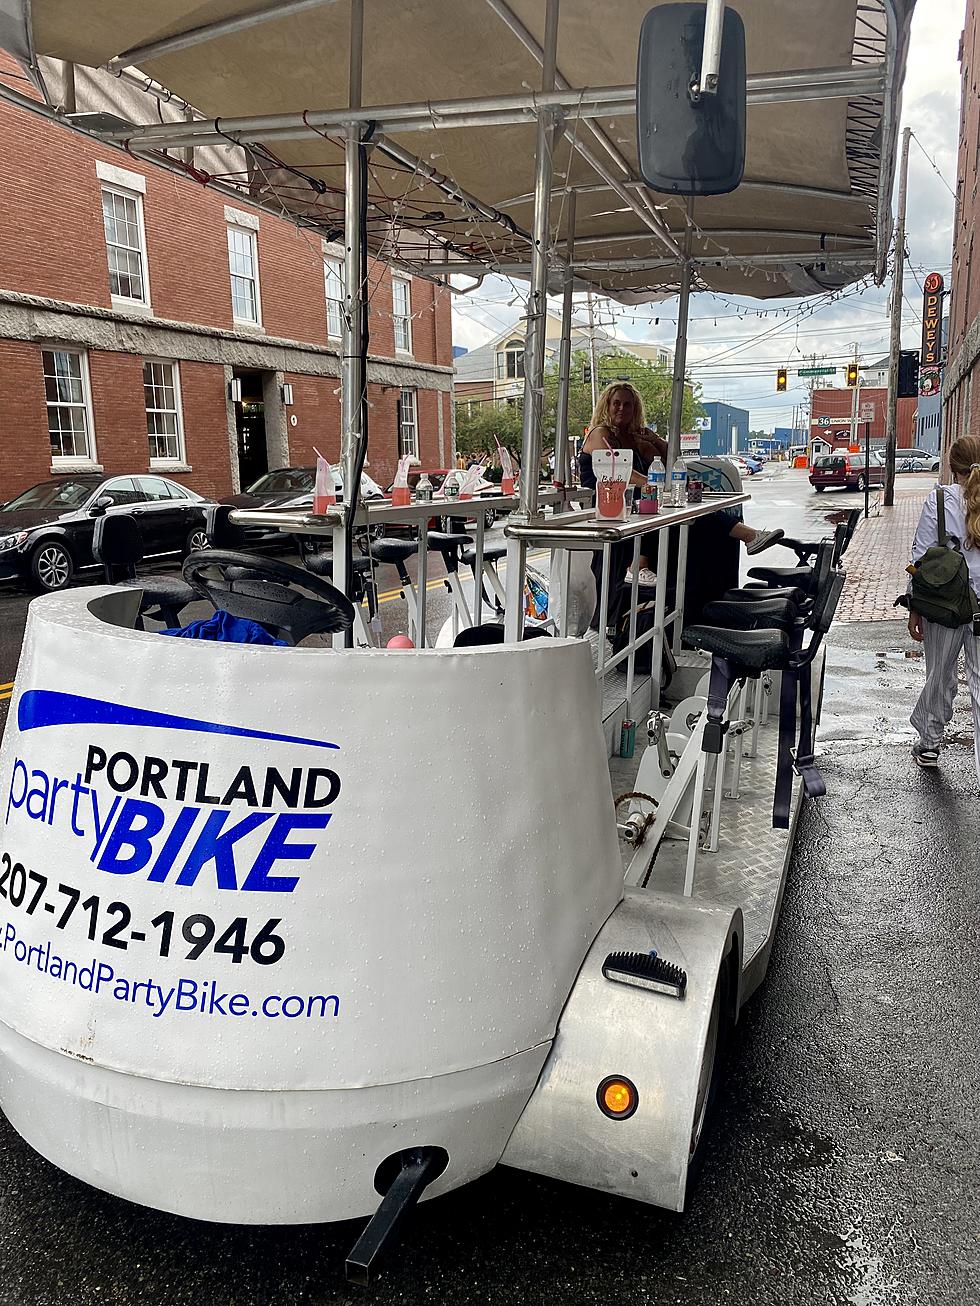 This Maine Party Bike Seats 14 People and Can Take You from Bar to Bar